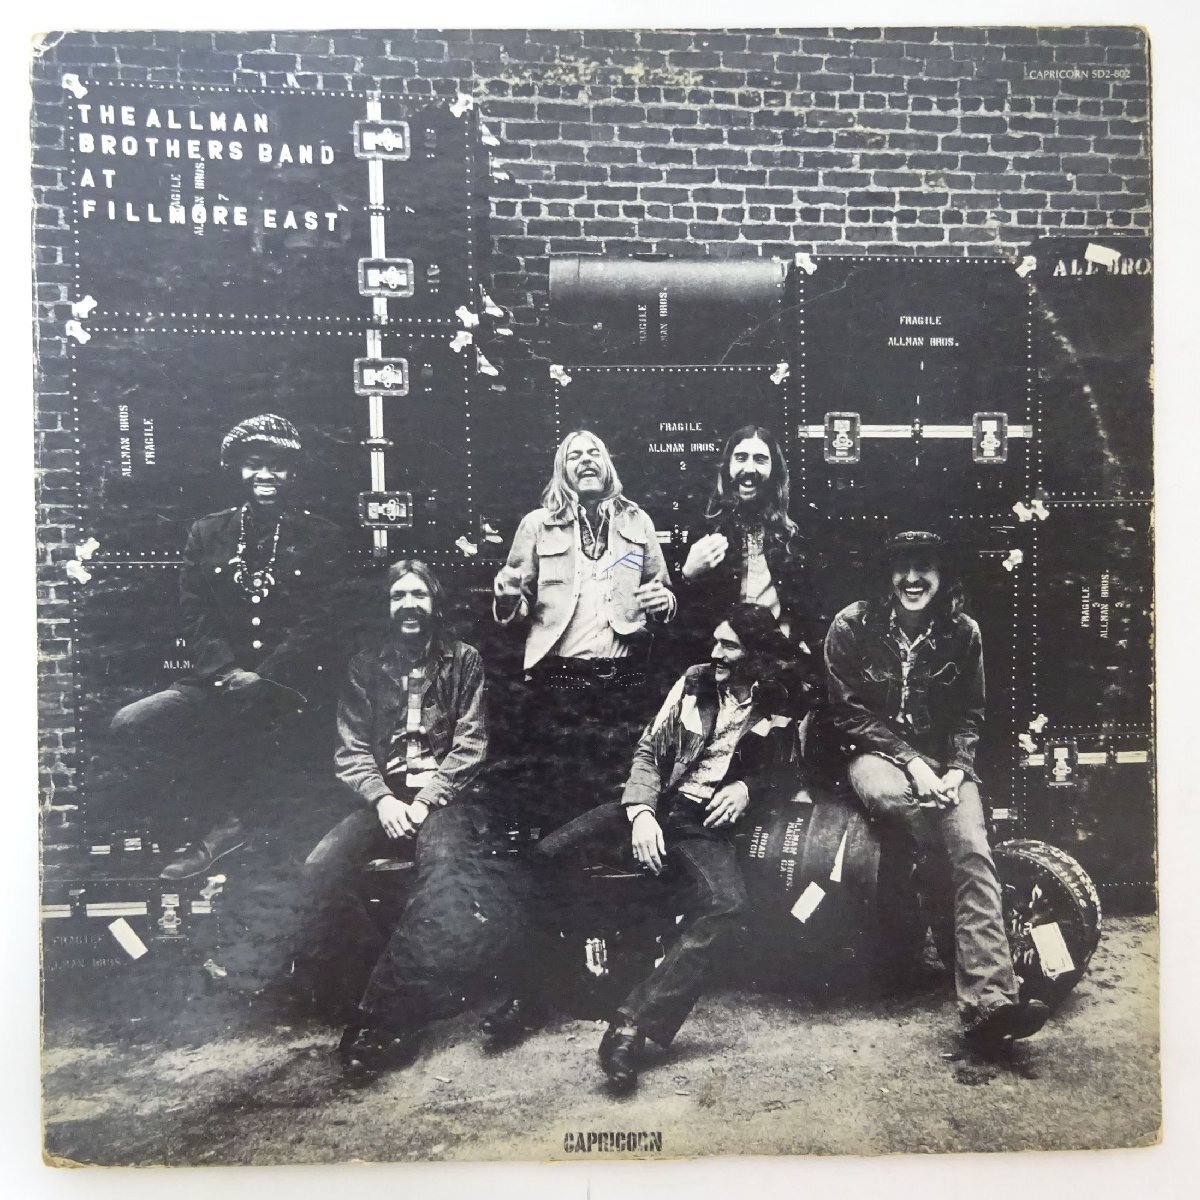 14031669;[US original /2LP/ see opening ]The Allman Brothers Band / The Allman Brothers Band At Fillmore East